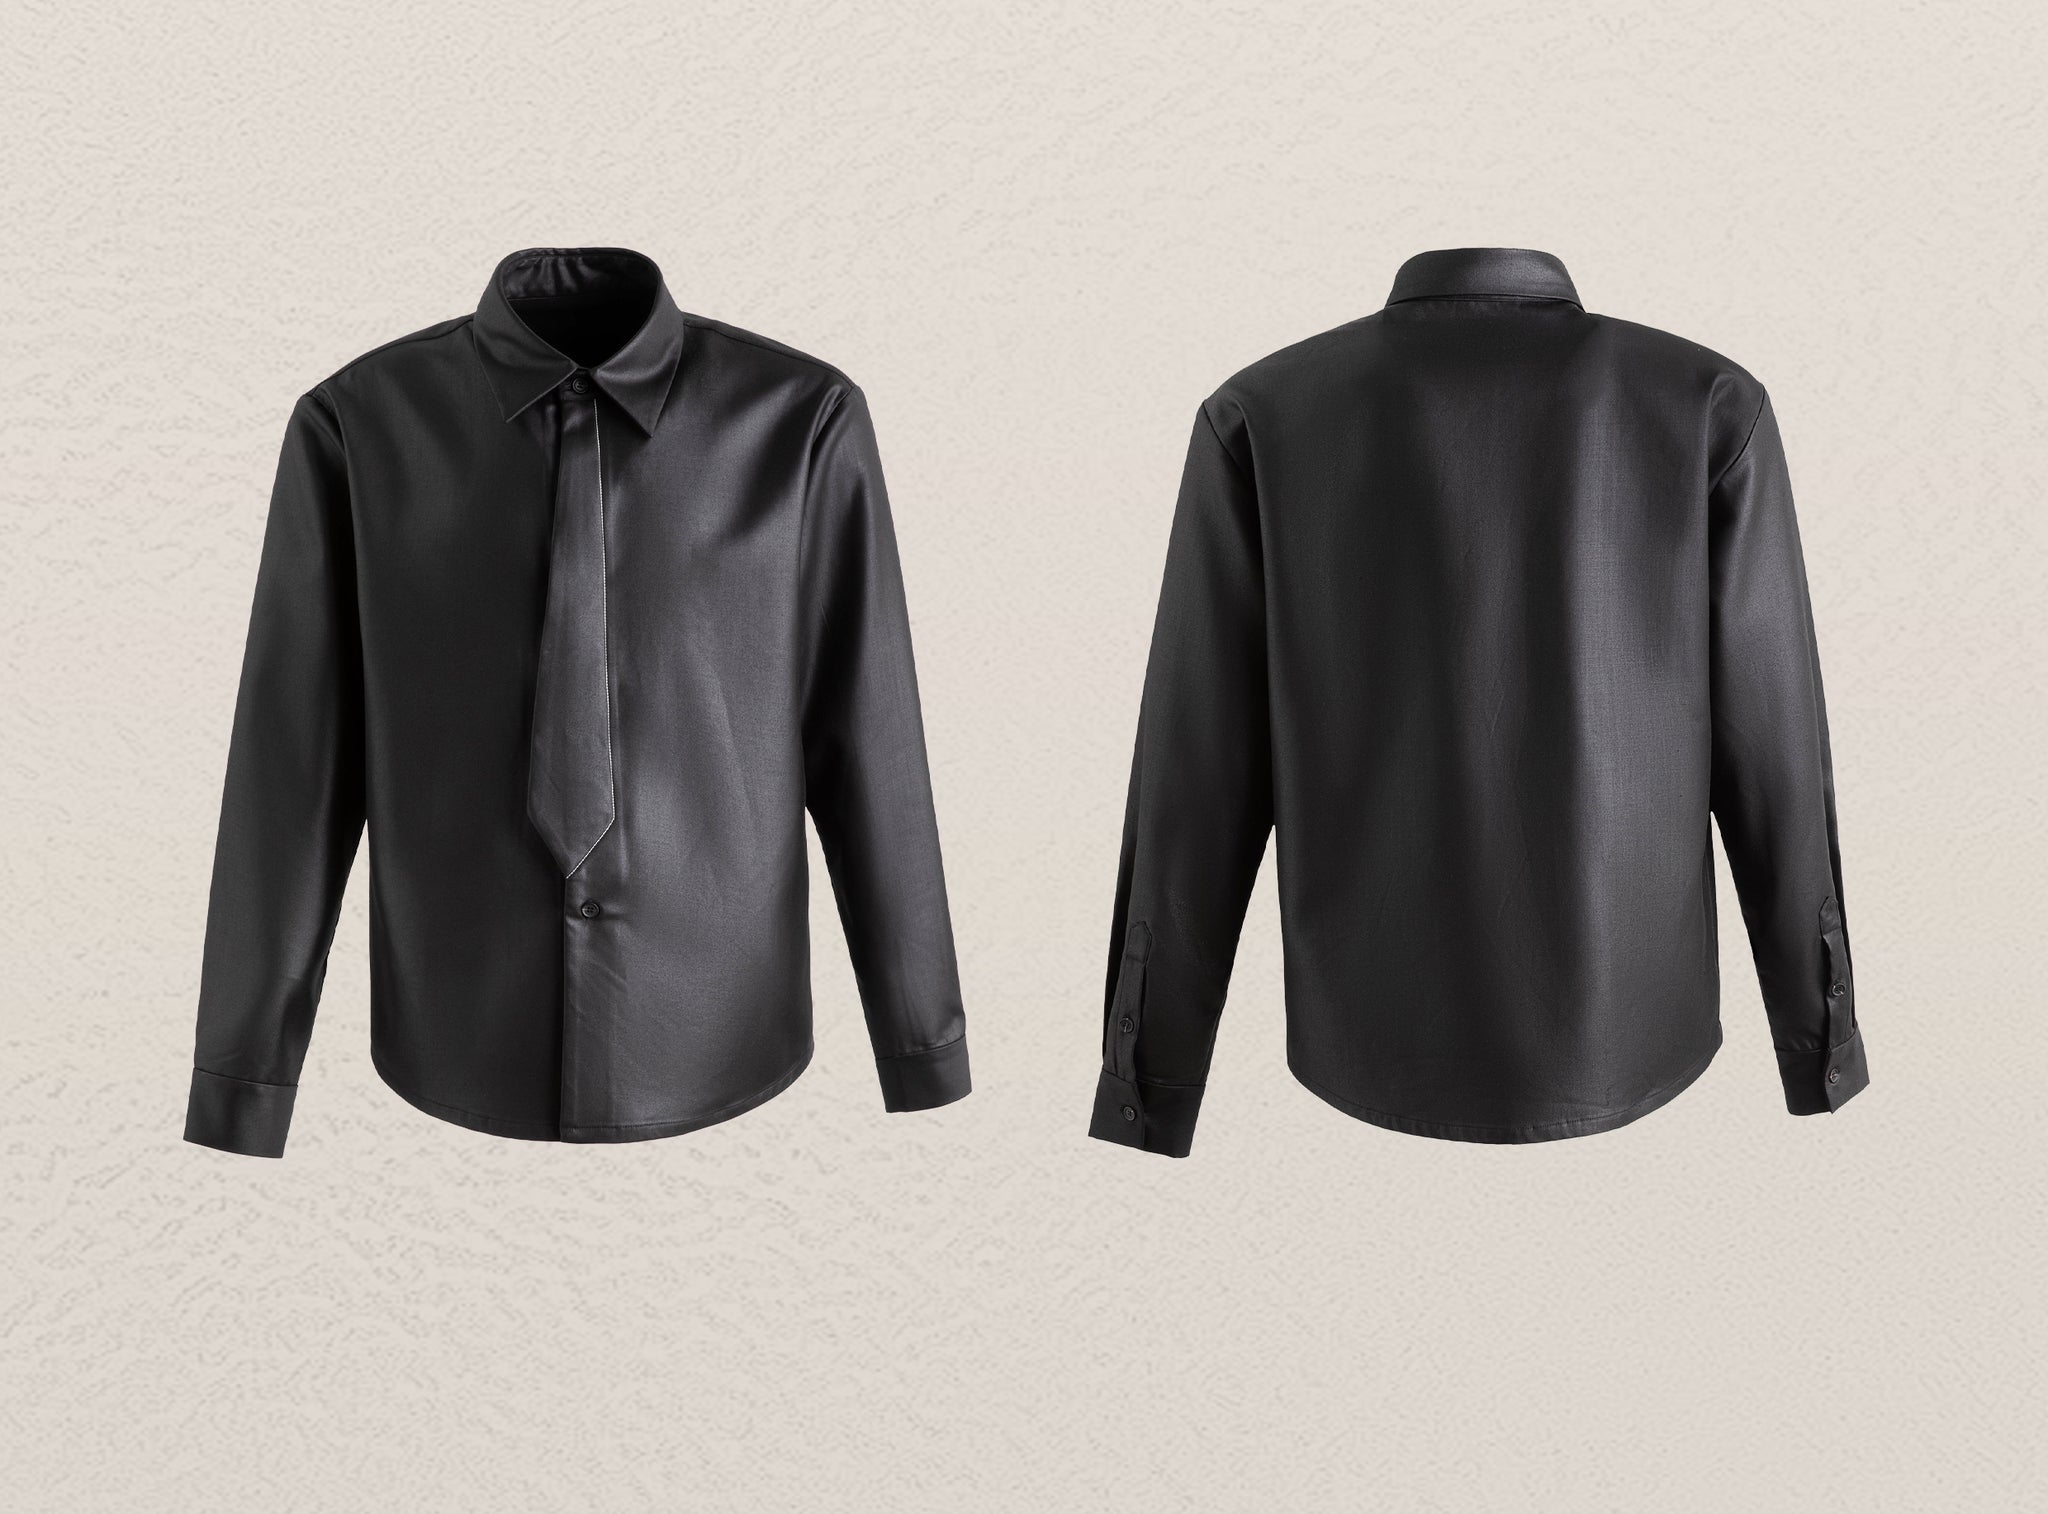 DP PARADIS 23AW Two-in-One Black Tie Shirt